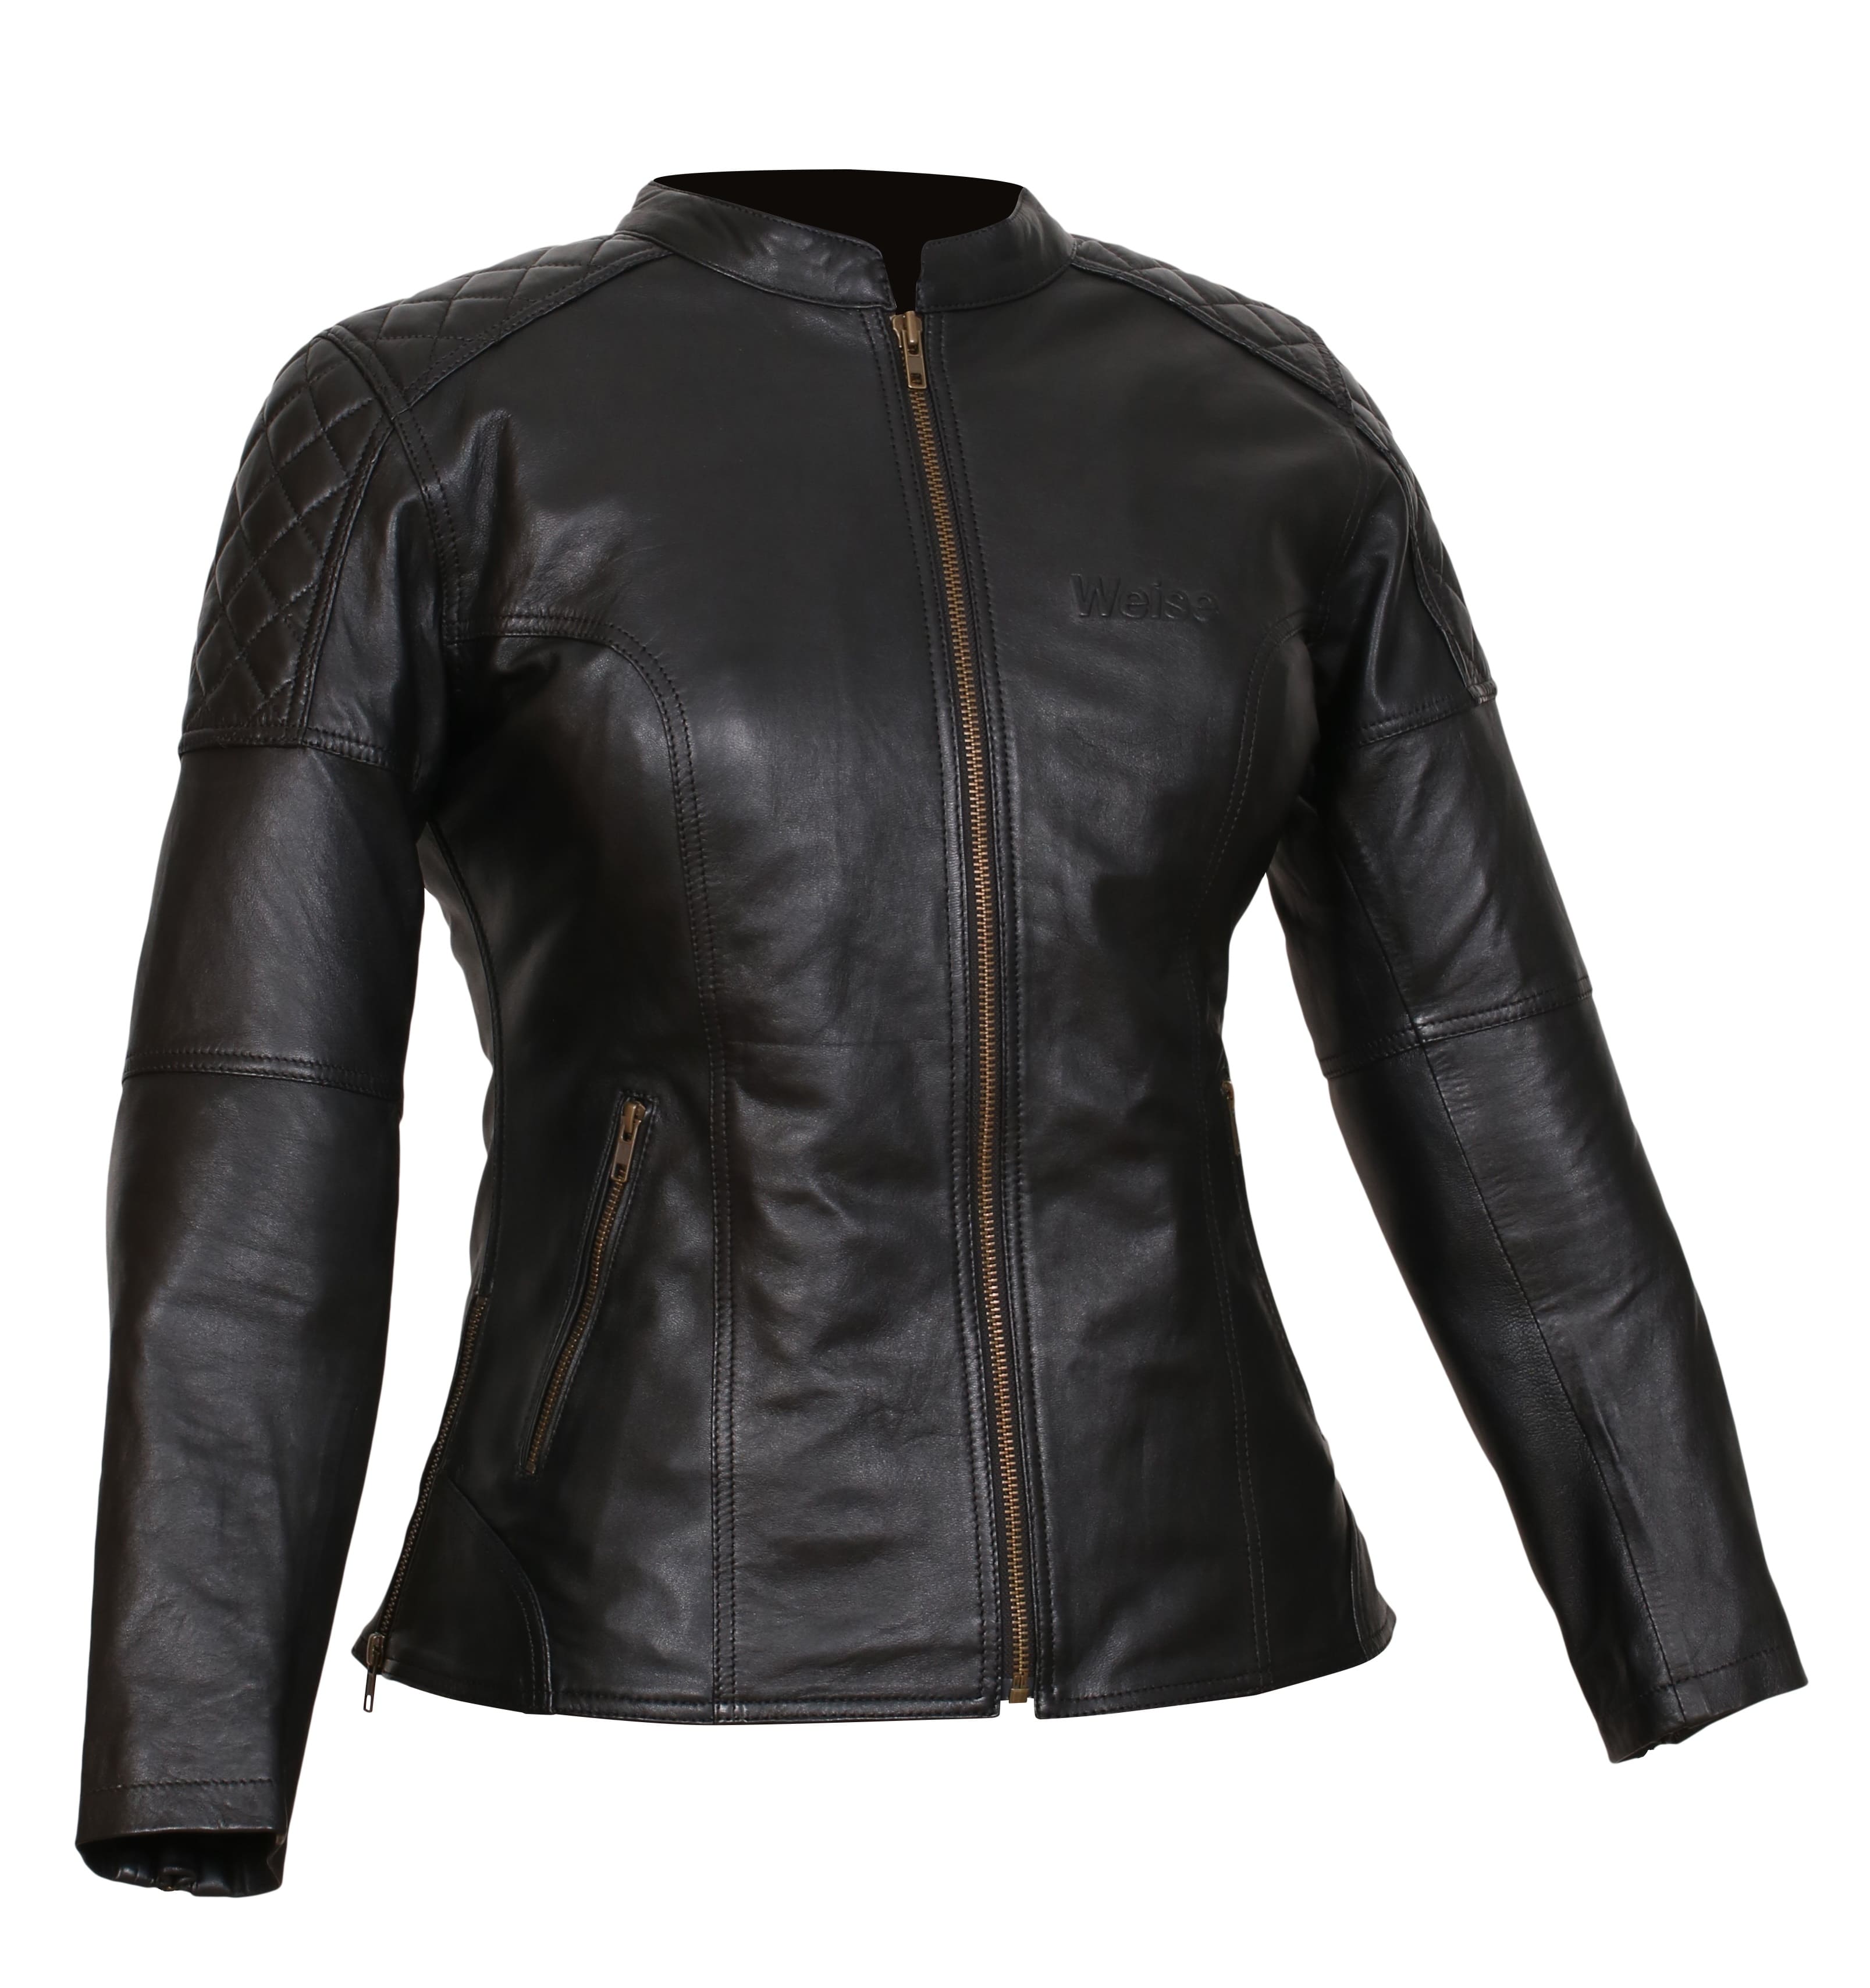 Weise Earhart Ladies Leather Jacket - Black | Two Wheel Centre | Free ...